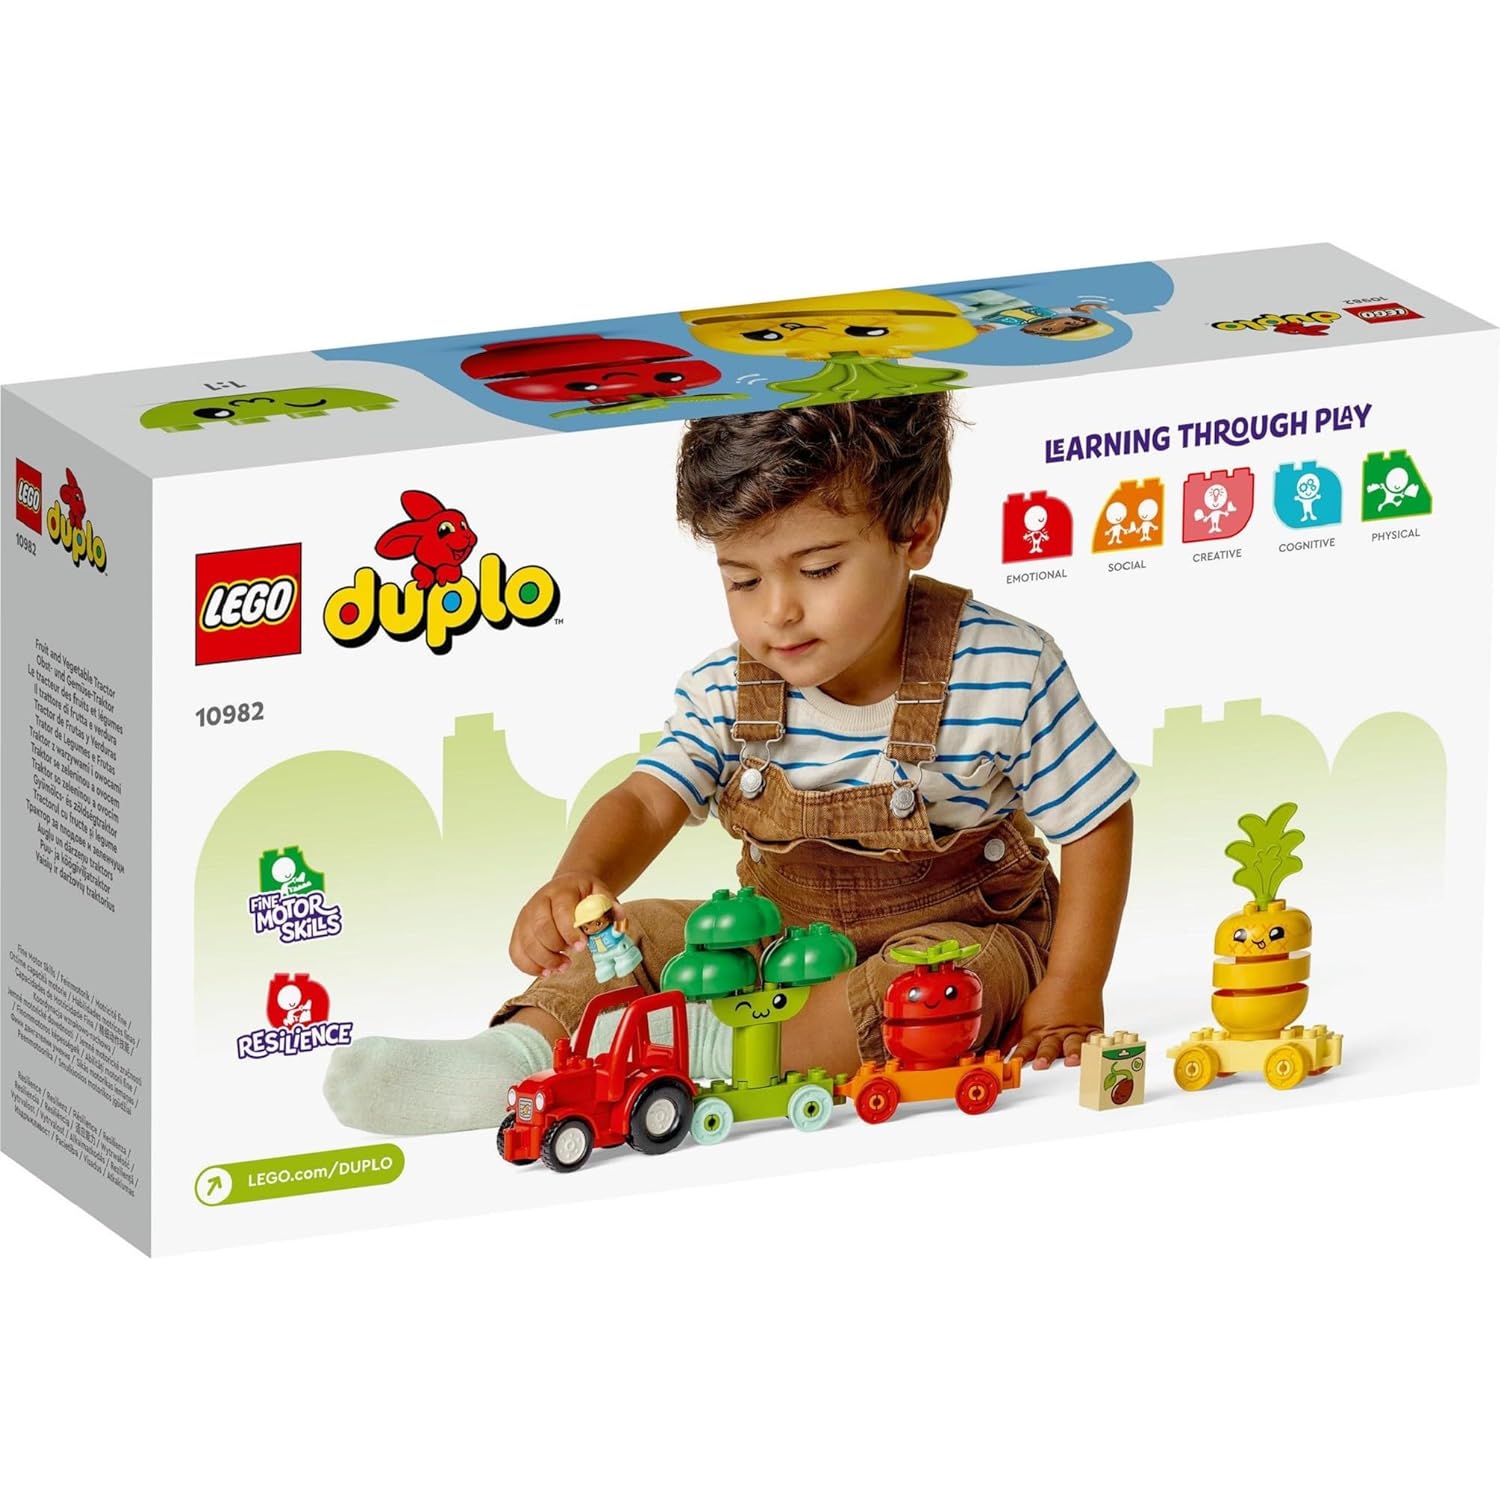 LEGO Duplo My First Fruit and Vegetable Tractor Building Kit for Ages 2+